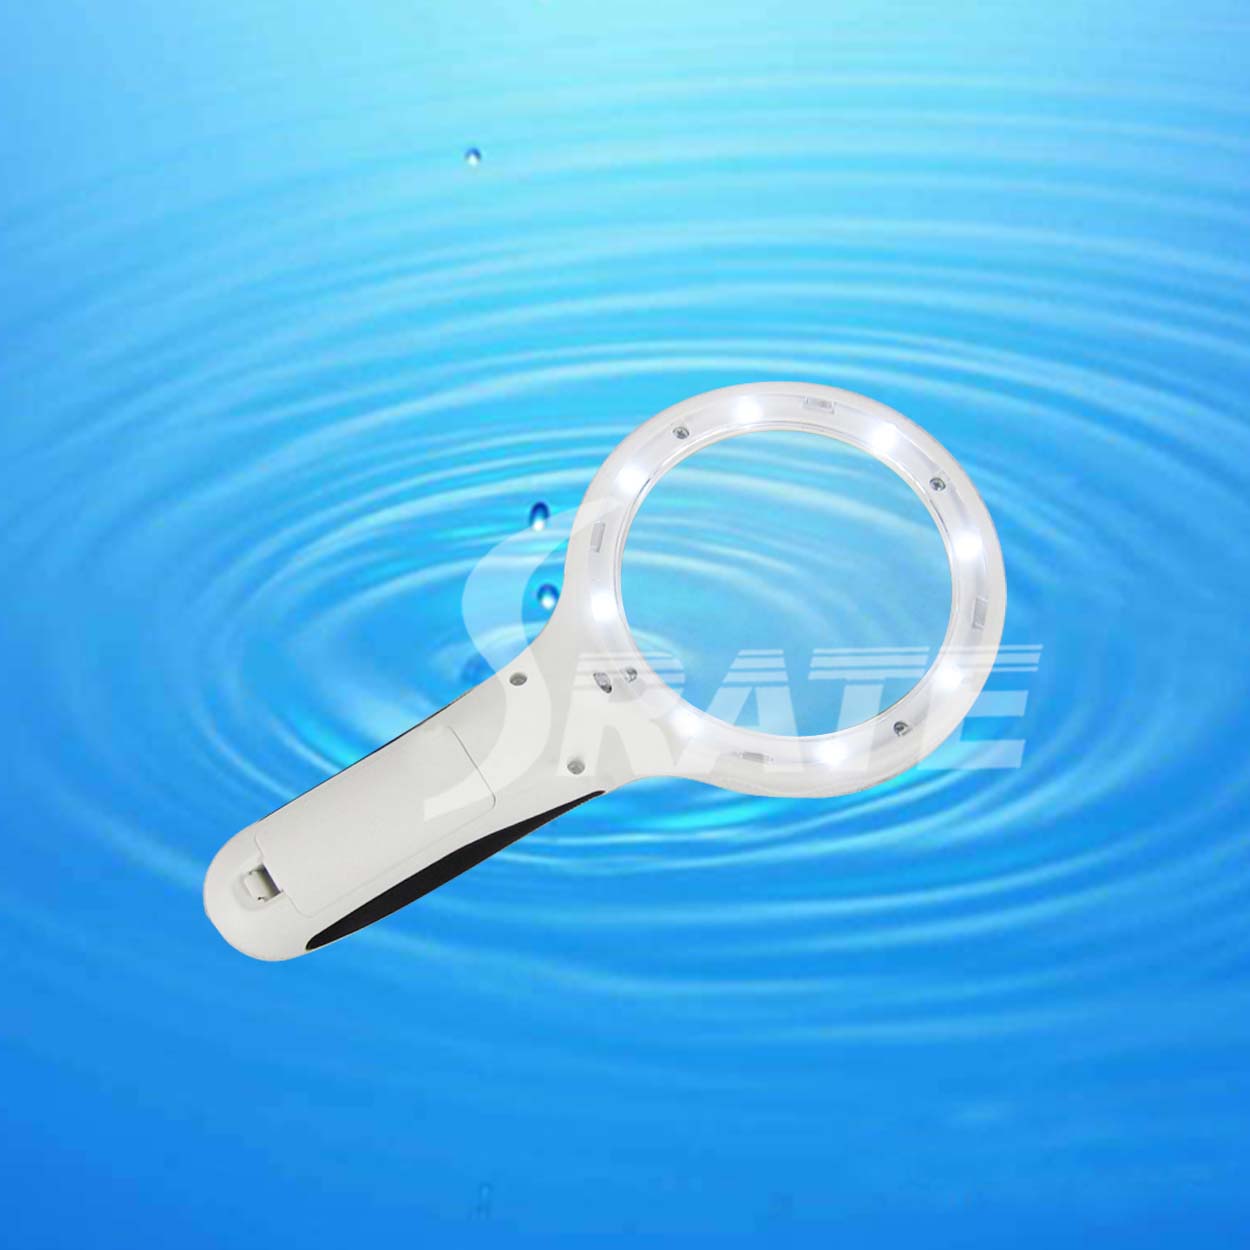 8 LED Handheld Currency Detecting Magnifier NO.9587